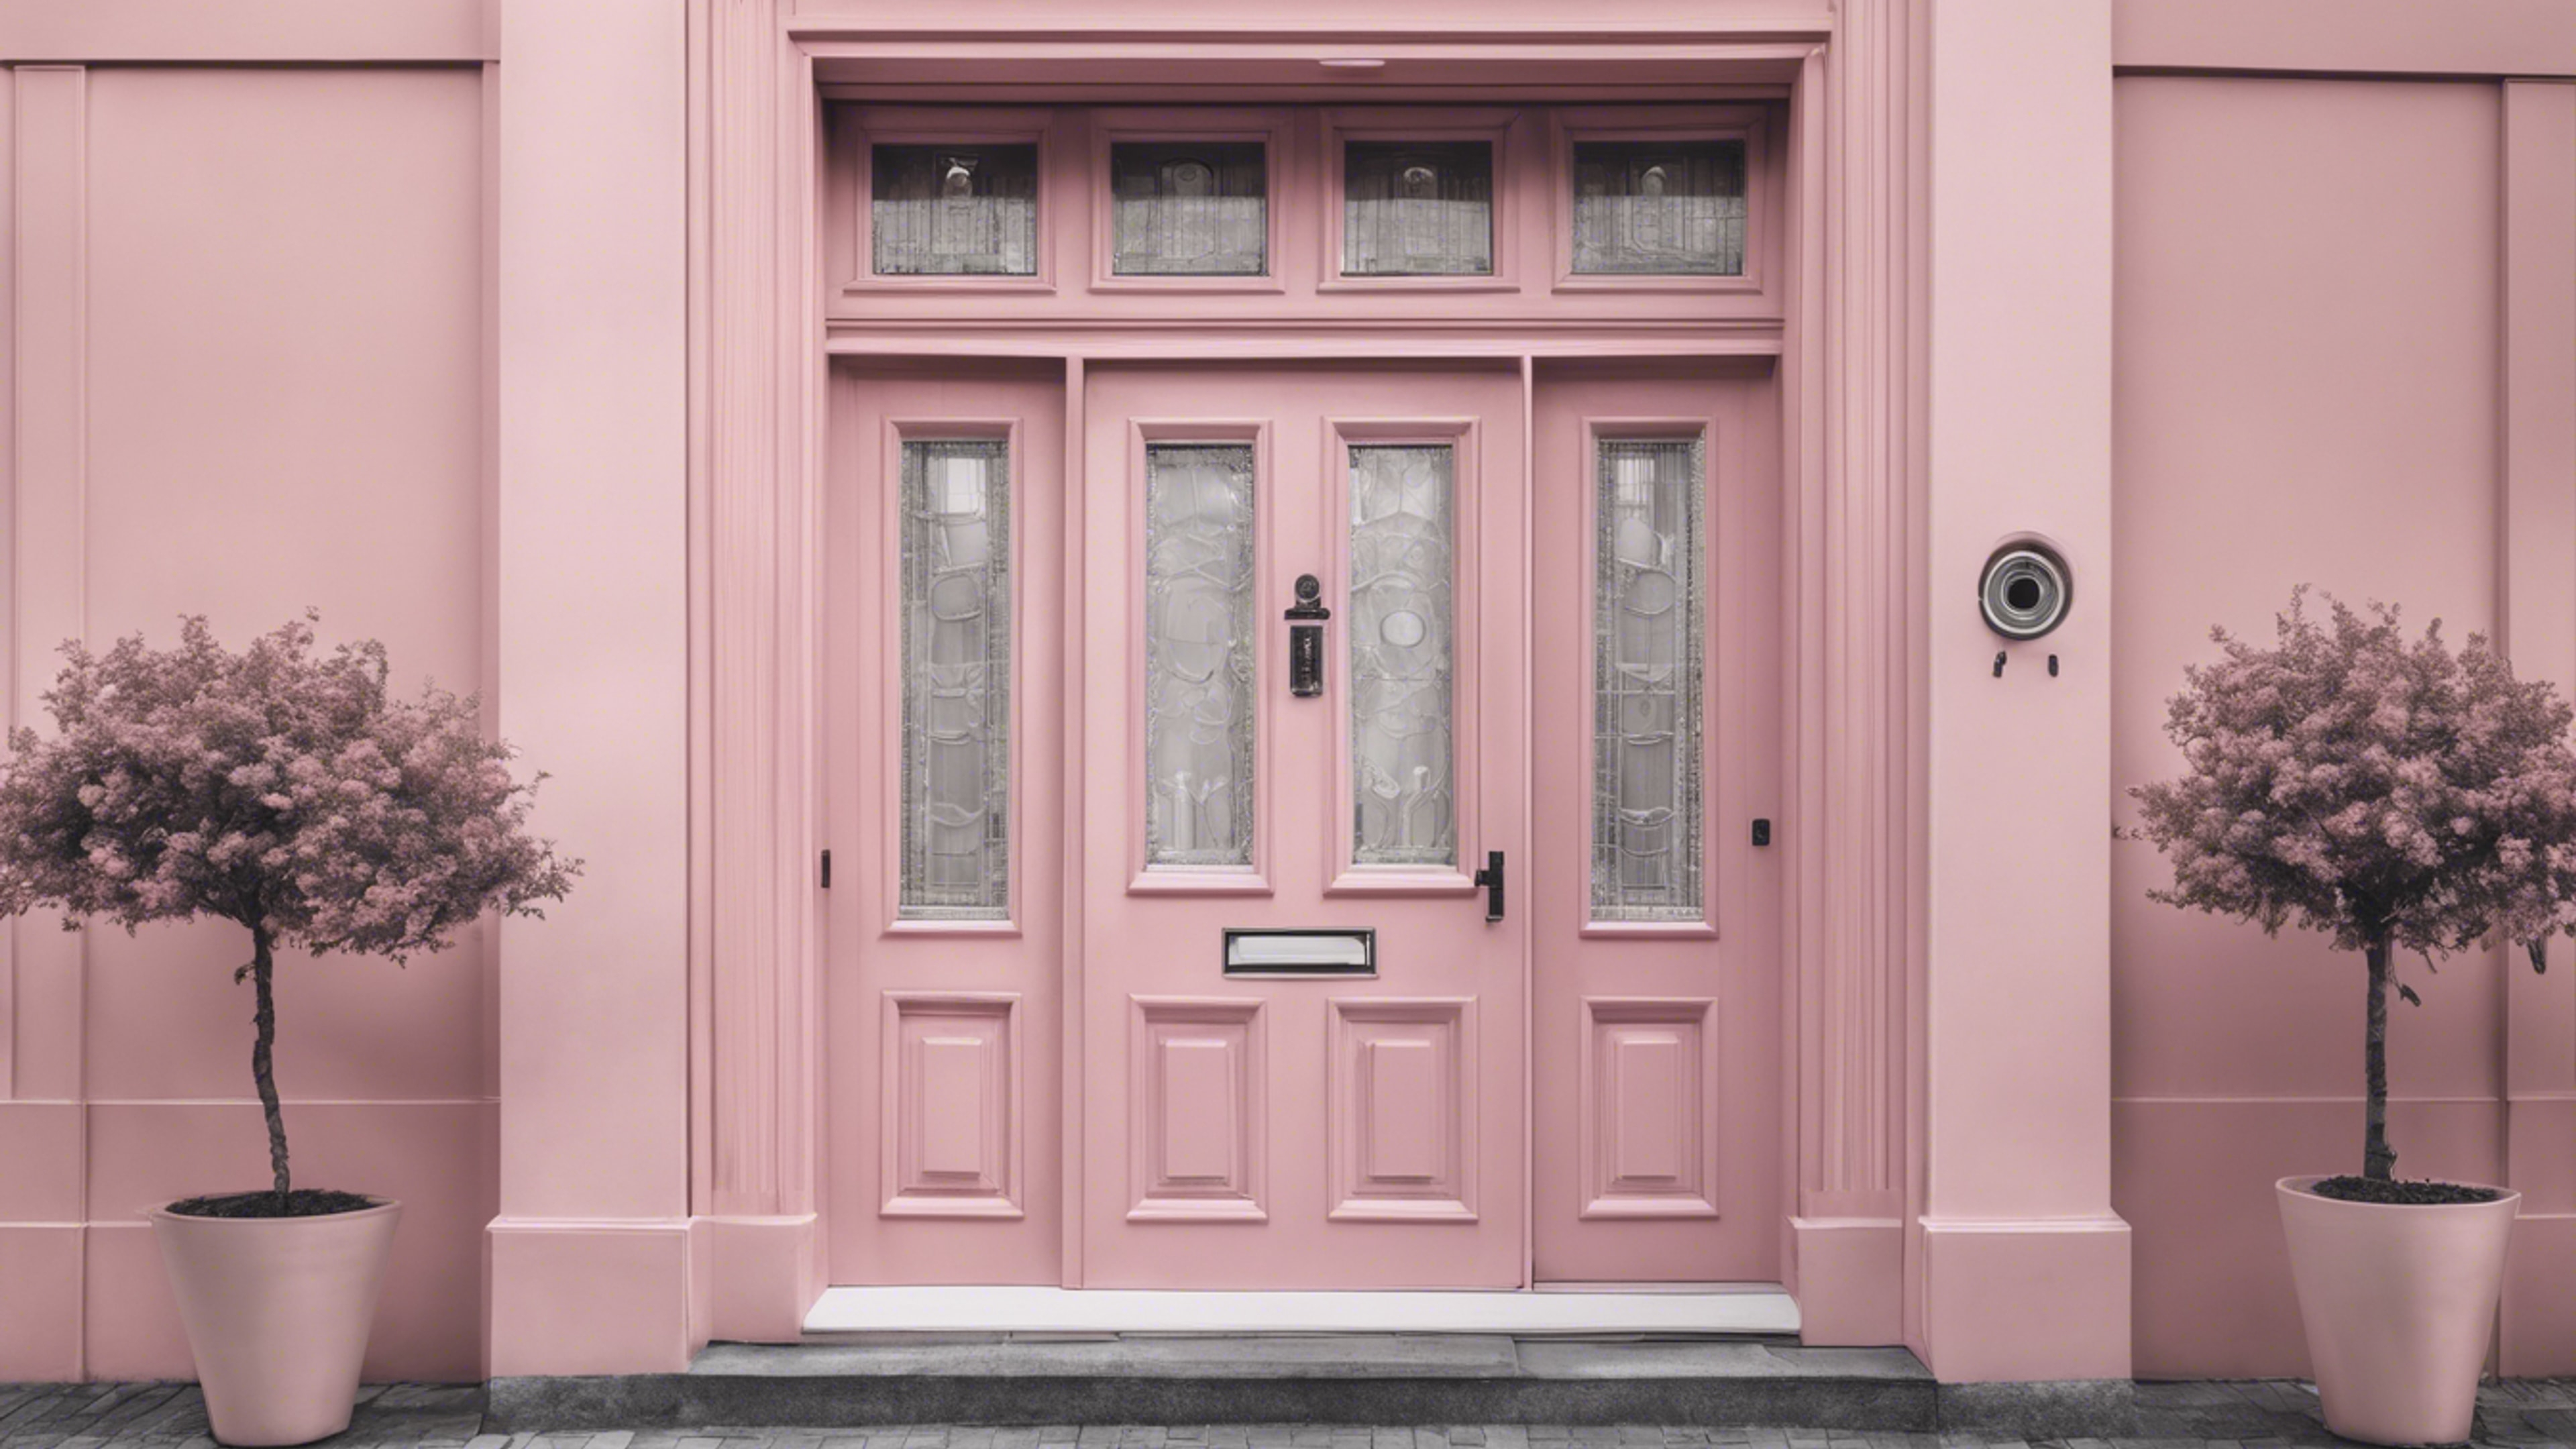 Monochrome image of a sophisticated townhouse door painted in a fetching preppy pastel pink. Sfondo[a9cdce63c1c94c029691]